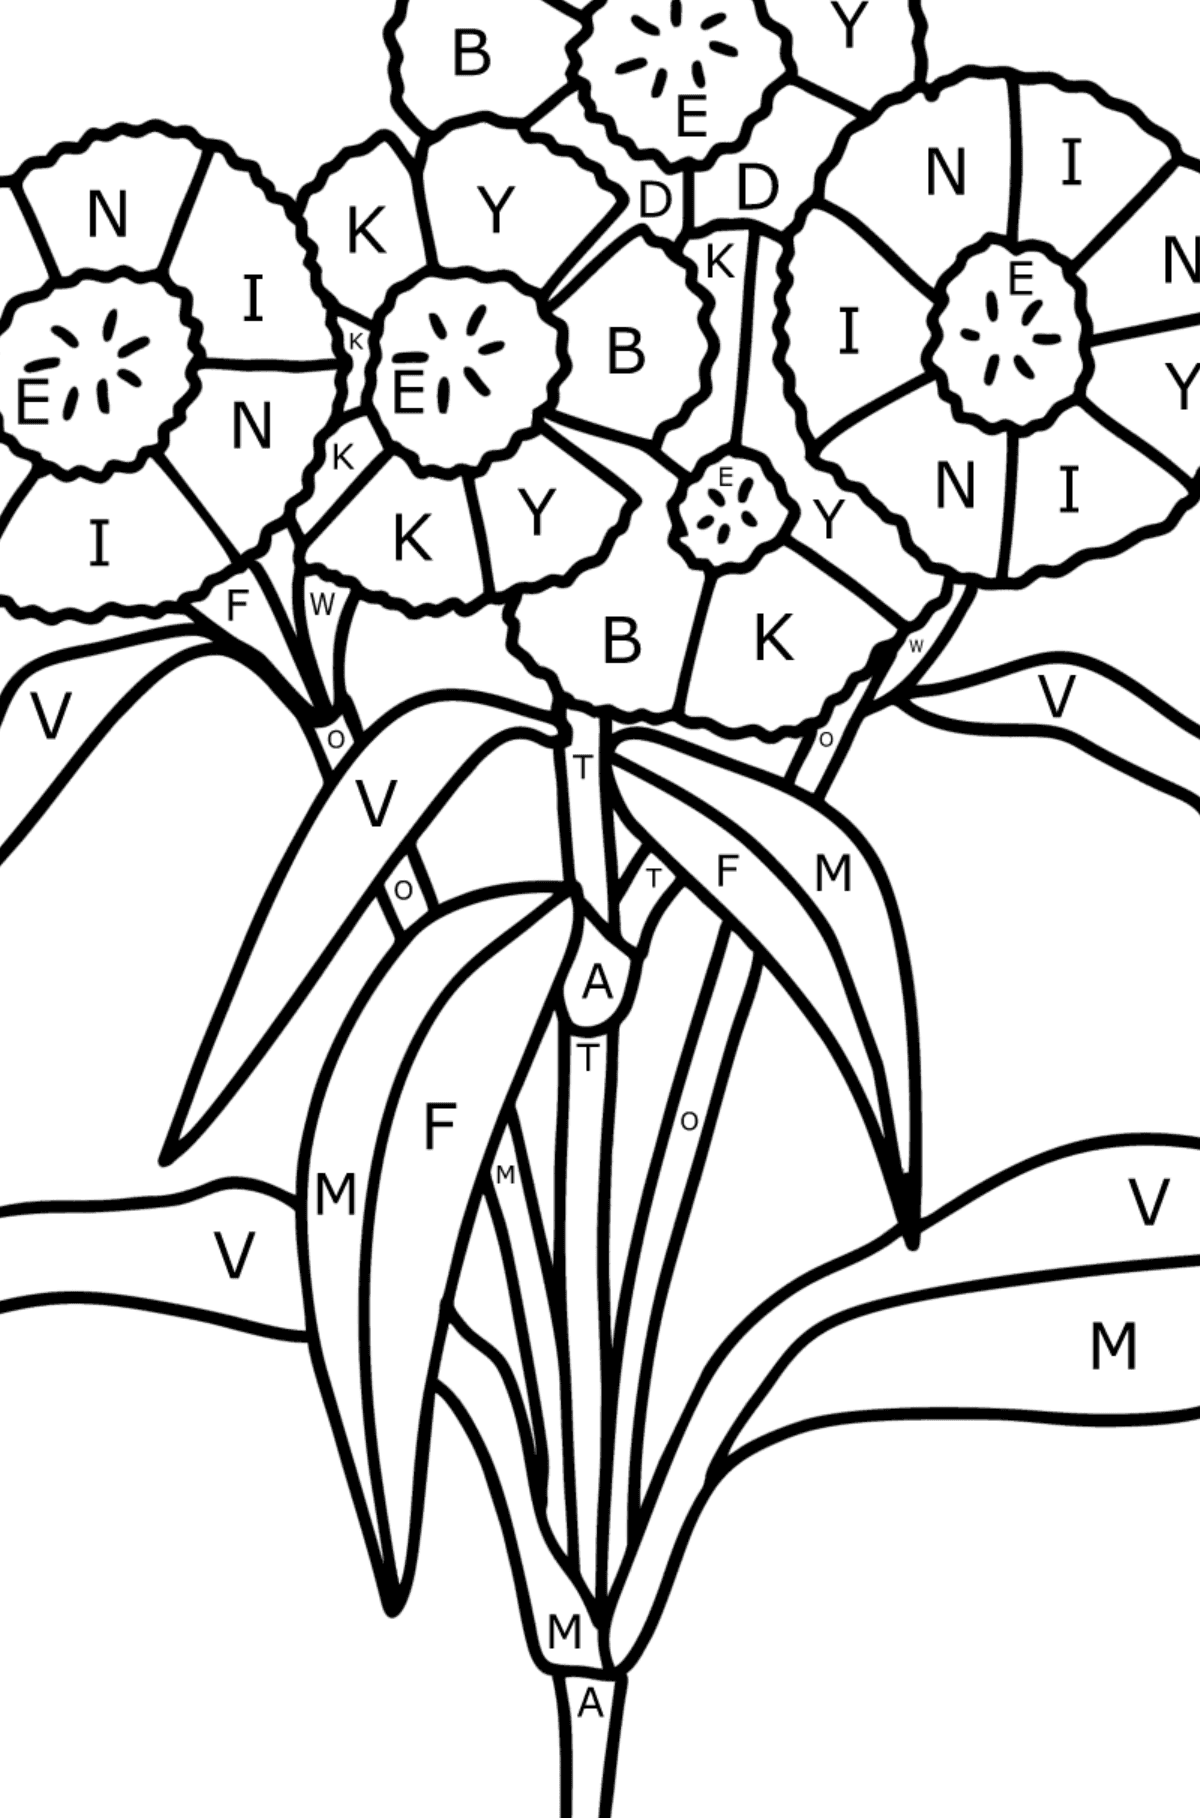 Carnations coloring page - Coloring by Letters for Kids